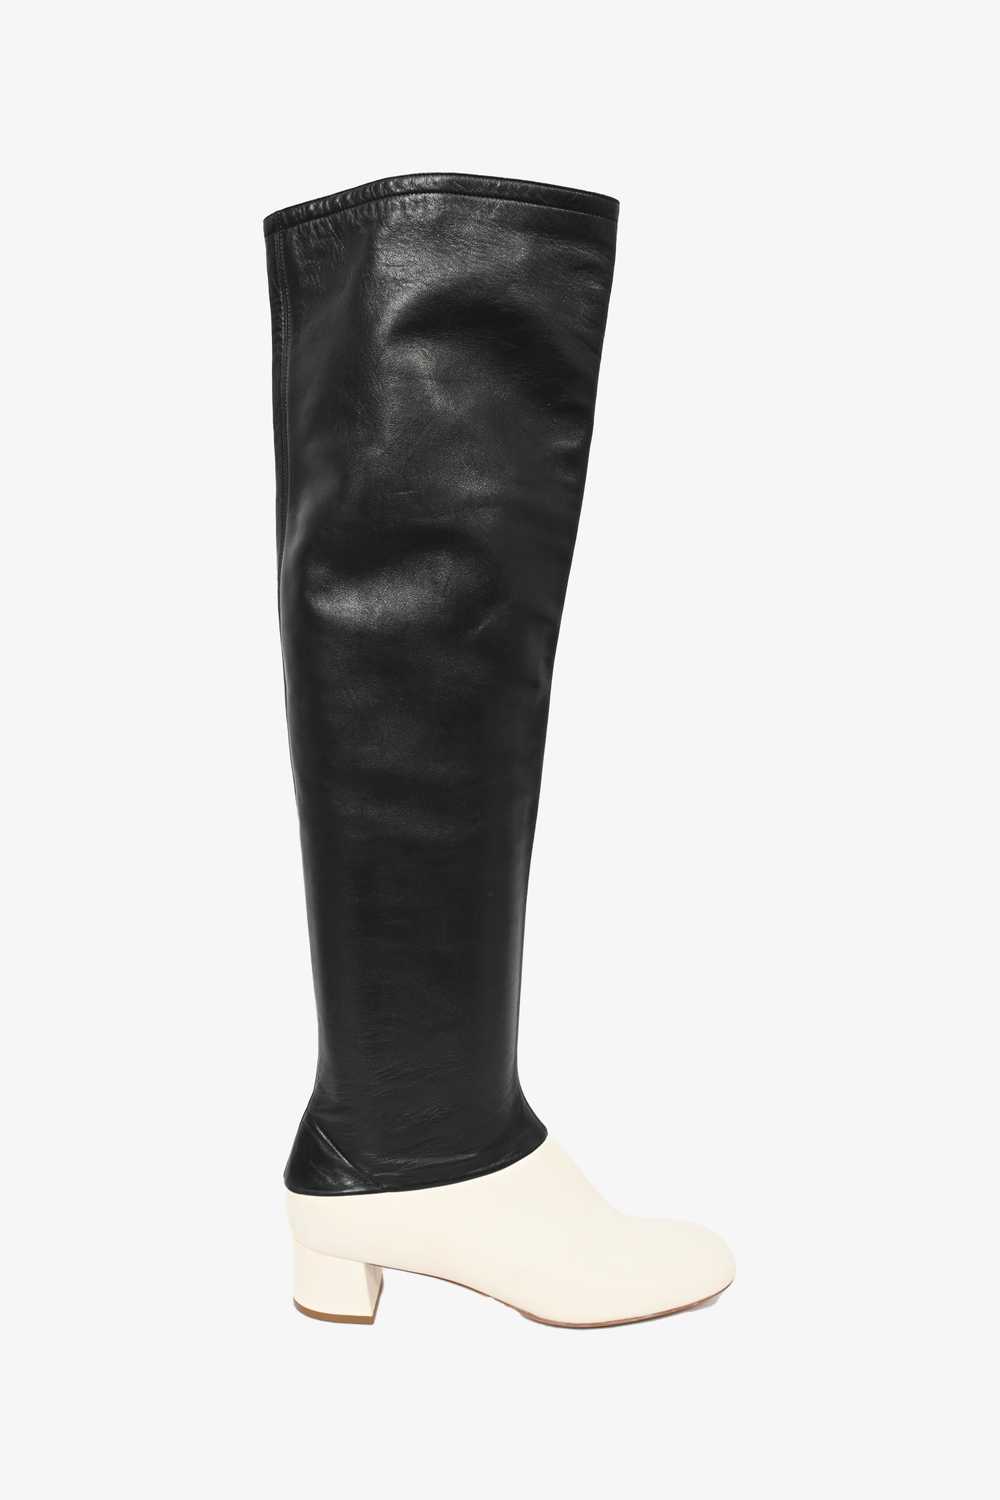 Celine Black/White Leather Knee High Boots Size 36 - image 1